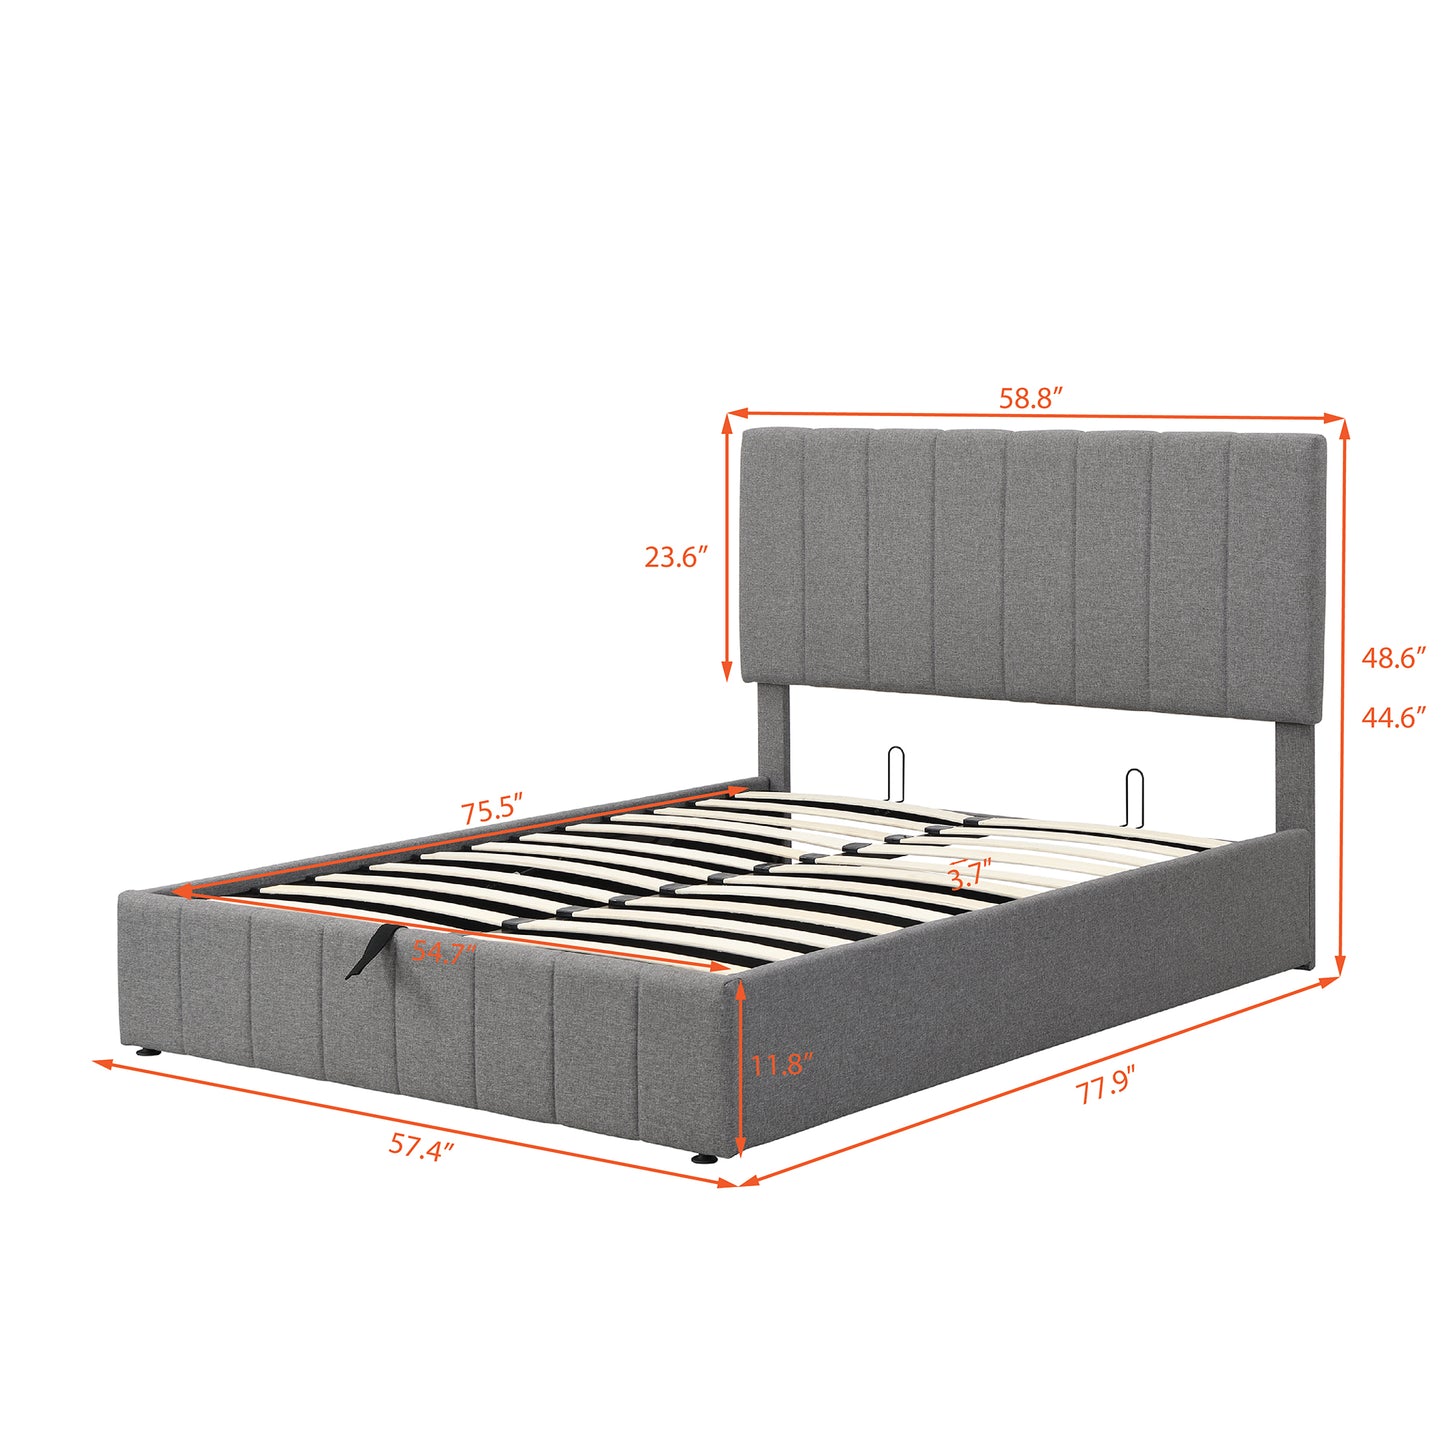 Full size Upholstered Platform bed with a Hydraulic  System - Gray